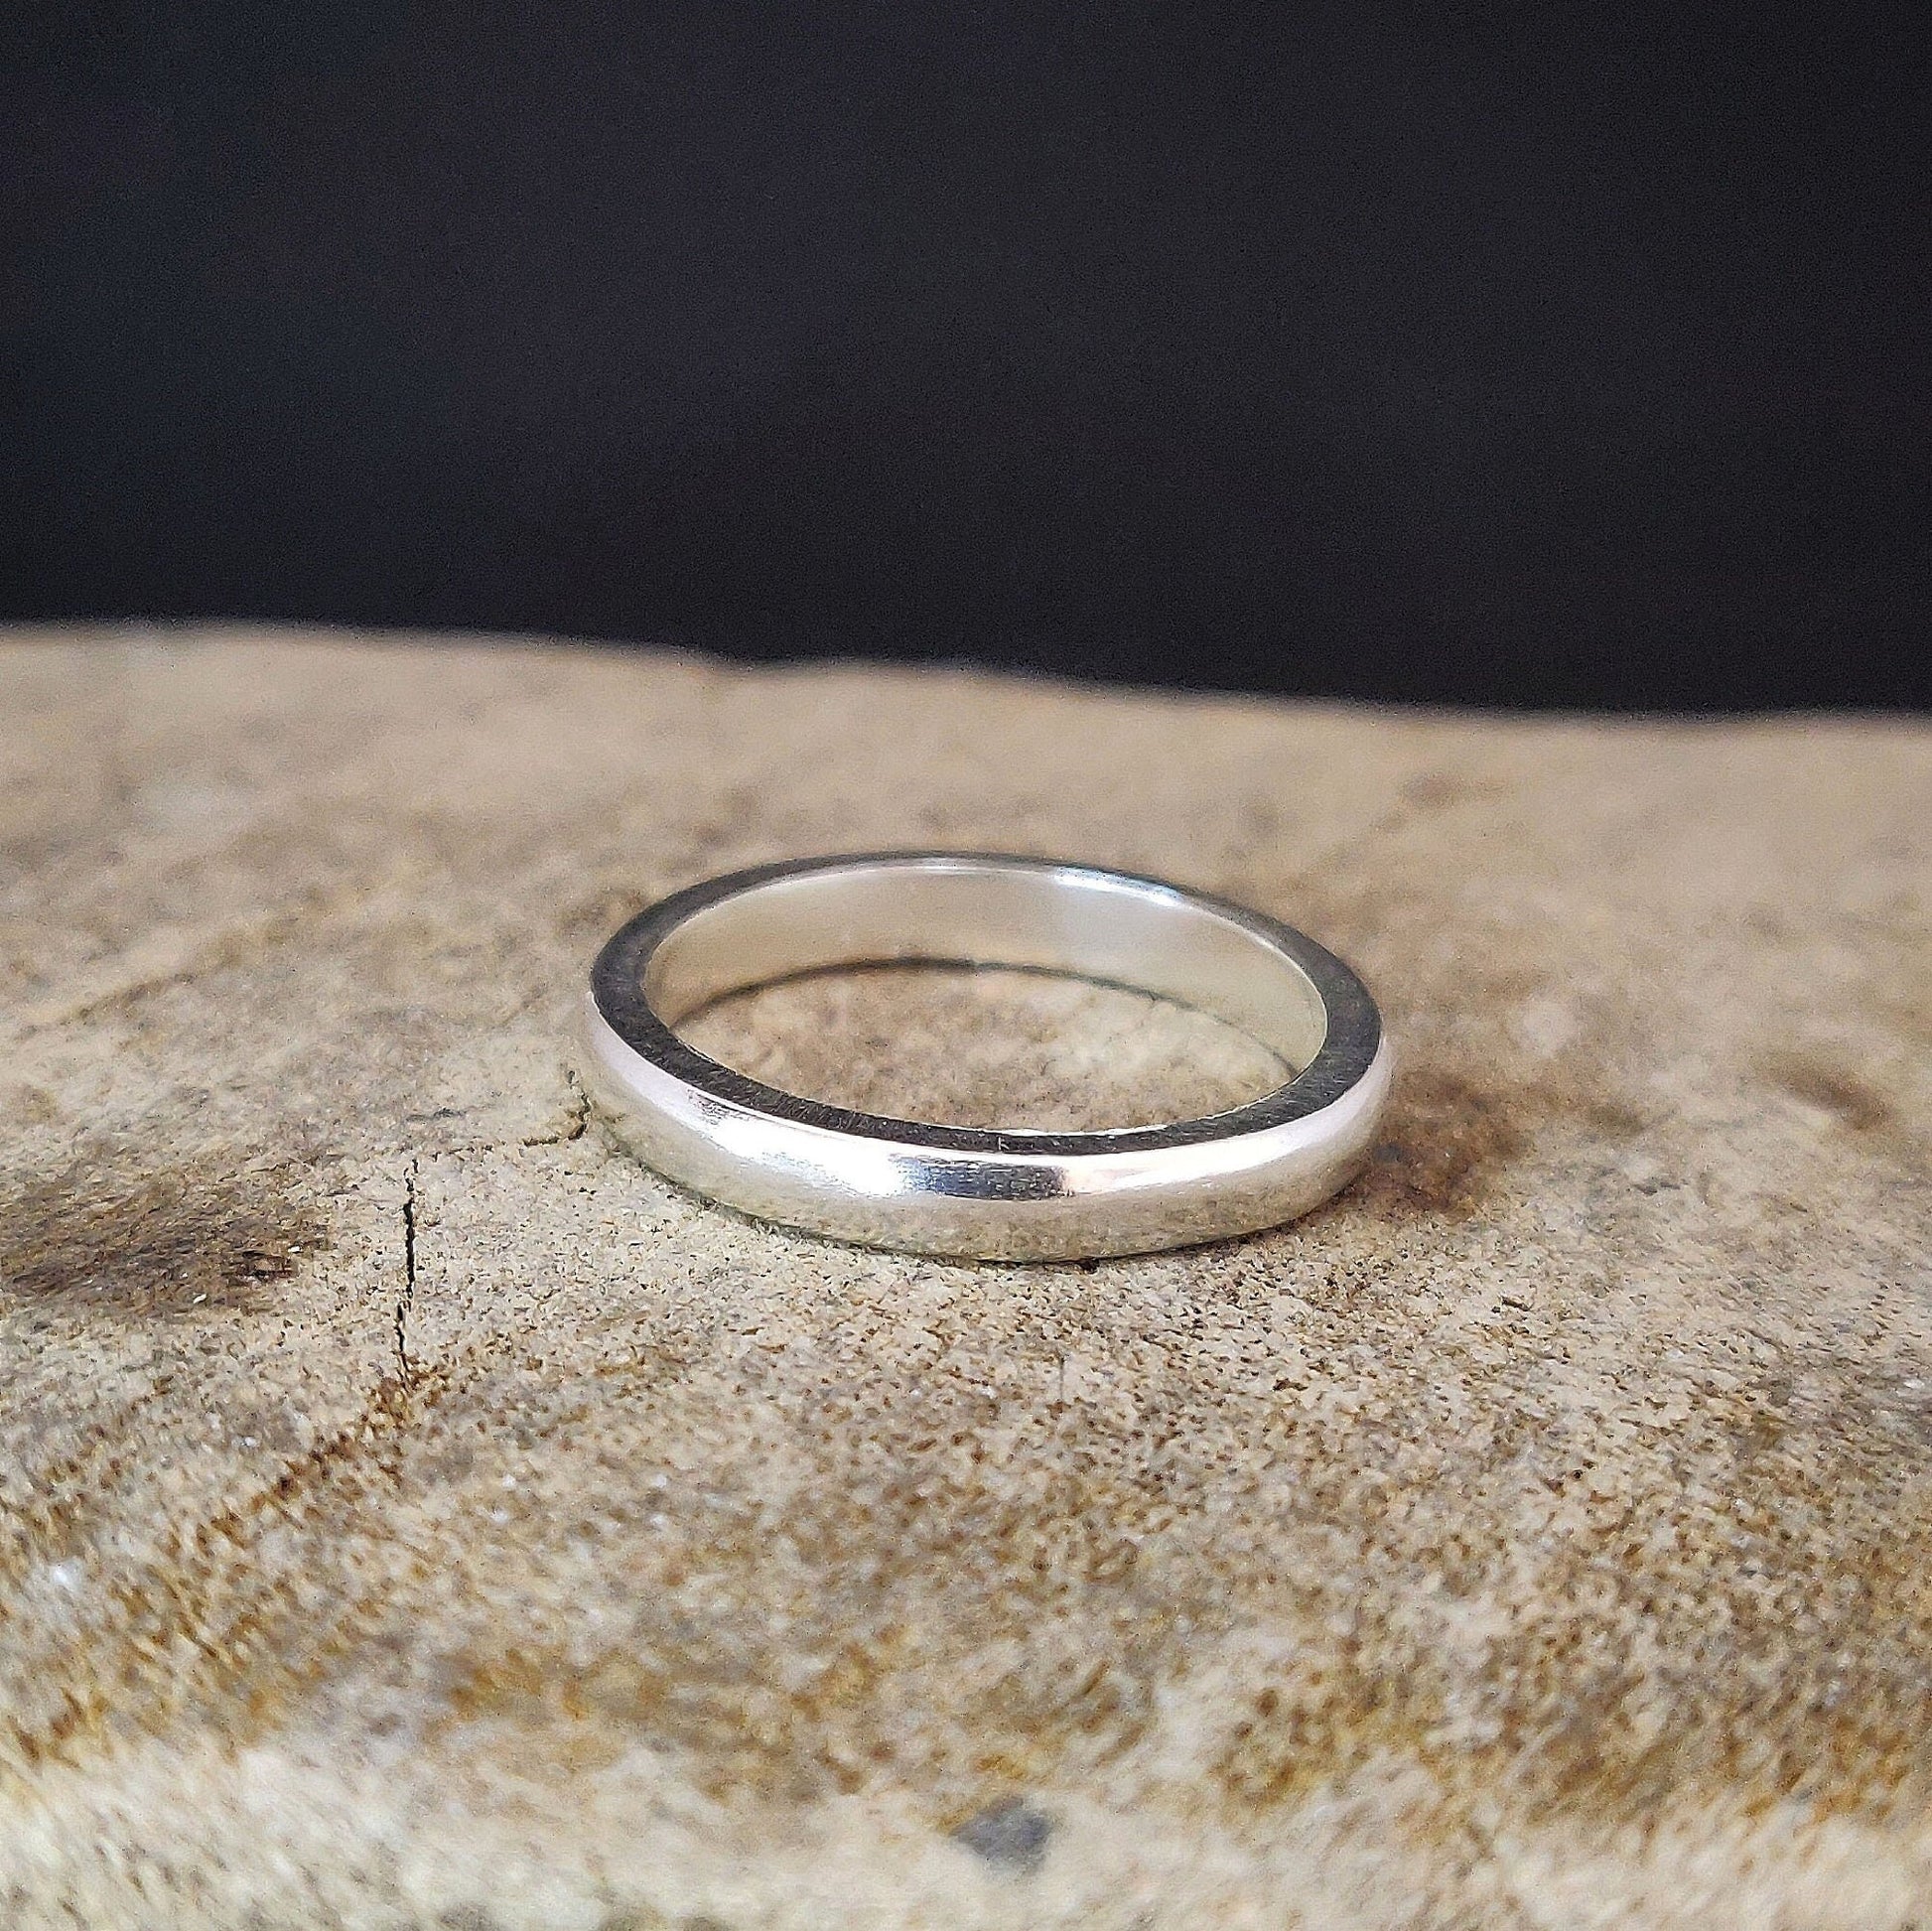 Silver Curved Profile Ring Blank. Cast Wedding Band for Jewelry Making. Jewelry Component. 9ct Yellow Gold Ring Blank.